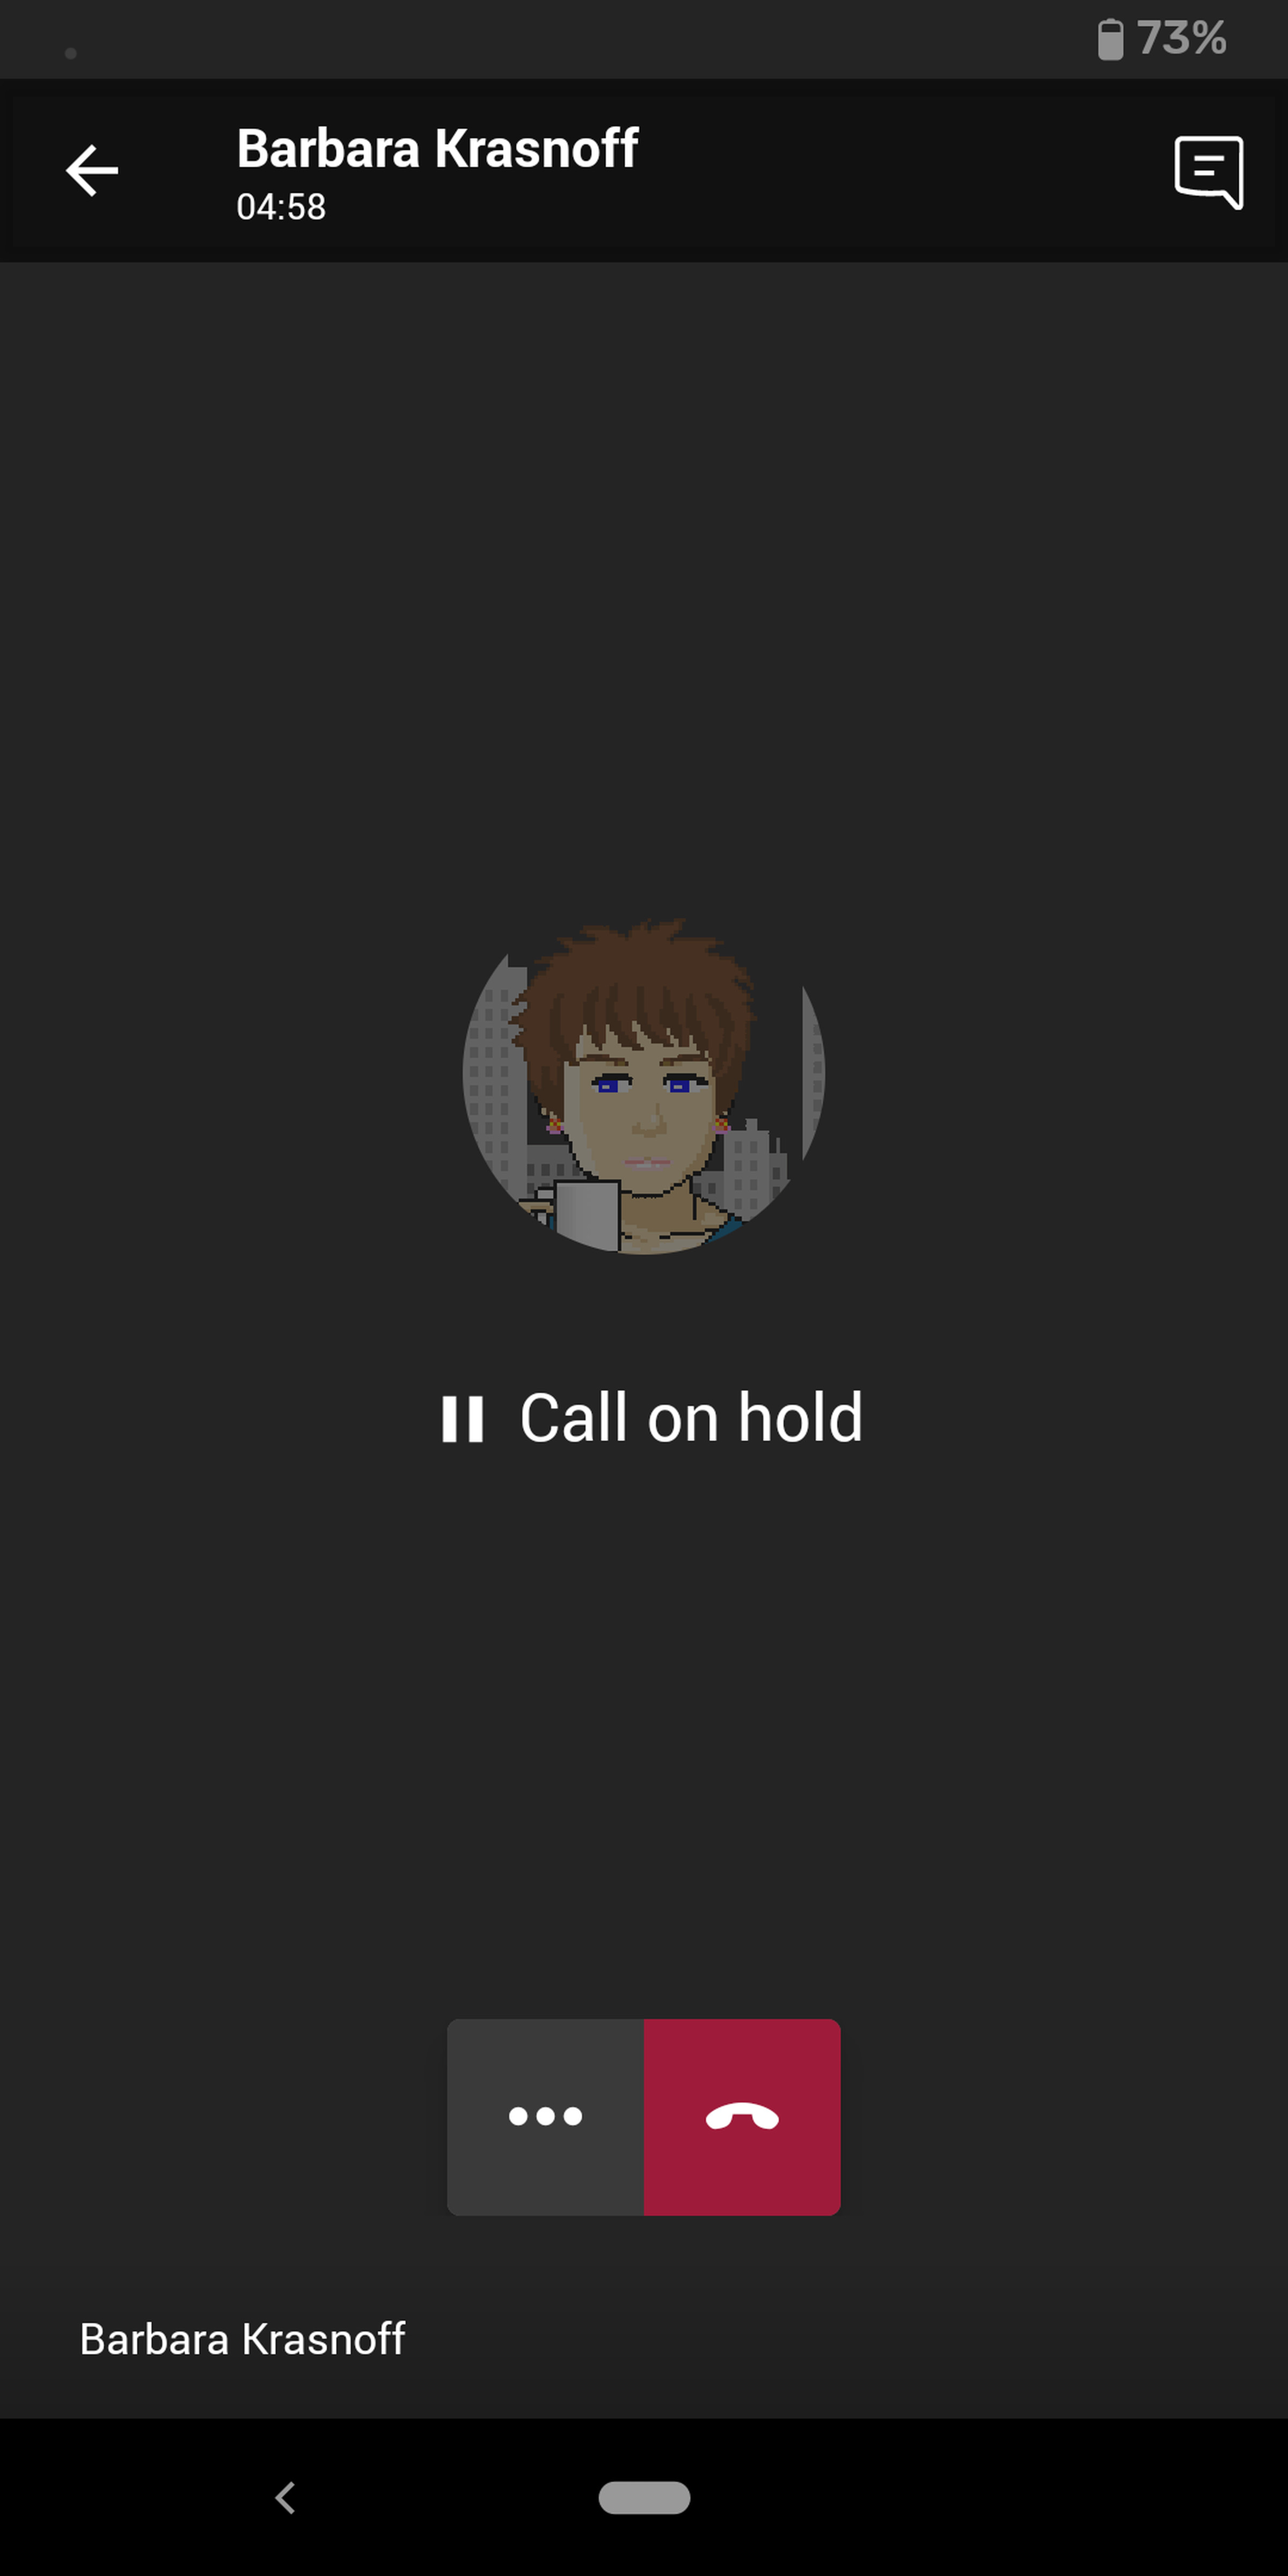 When you make a video or audio call, a caller can be put on hold.